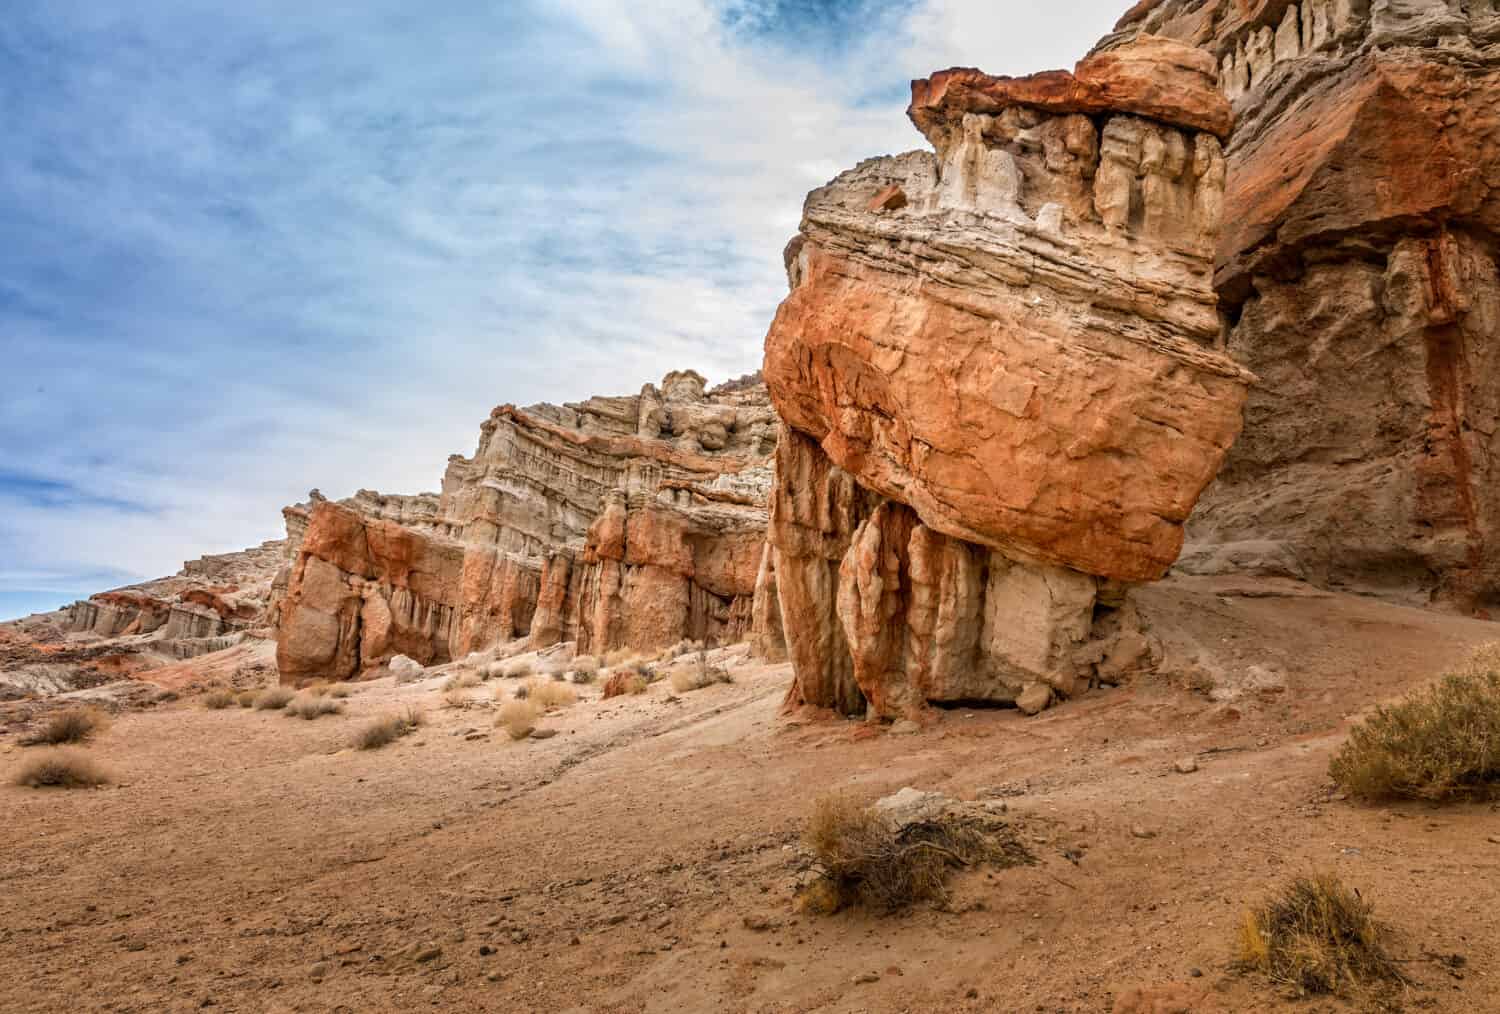 Cathedral like rock structures in the Red Rock Canyon State Park, California